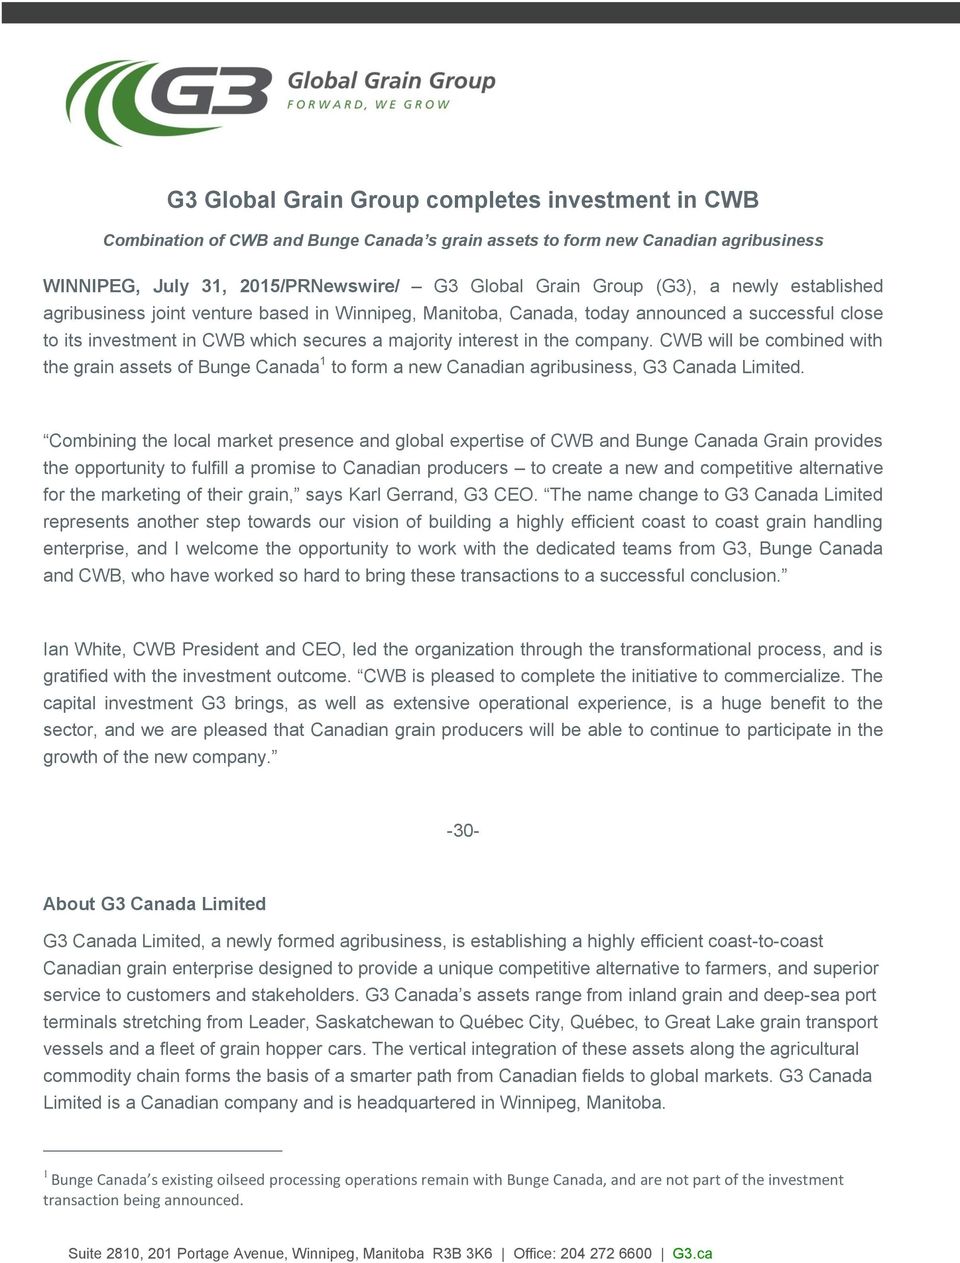 CWB will be combined with the grain assets of Bunge Canada 1 to form a new Canadian agribusiness, G3 Canada Limited.